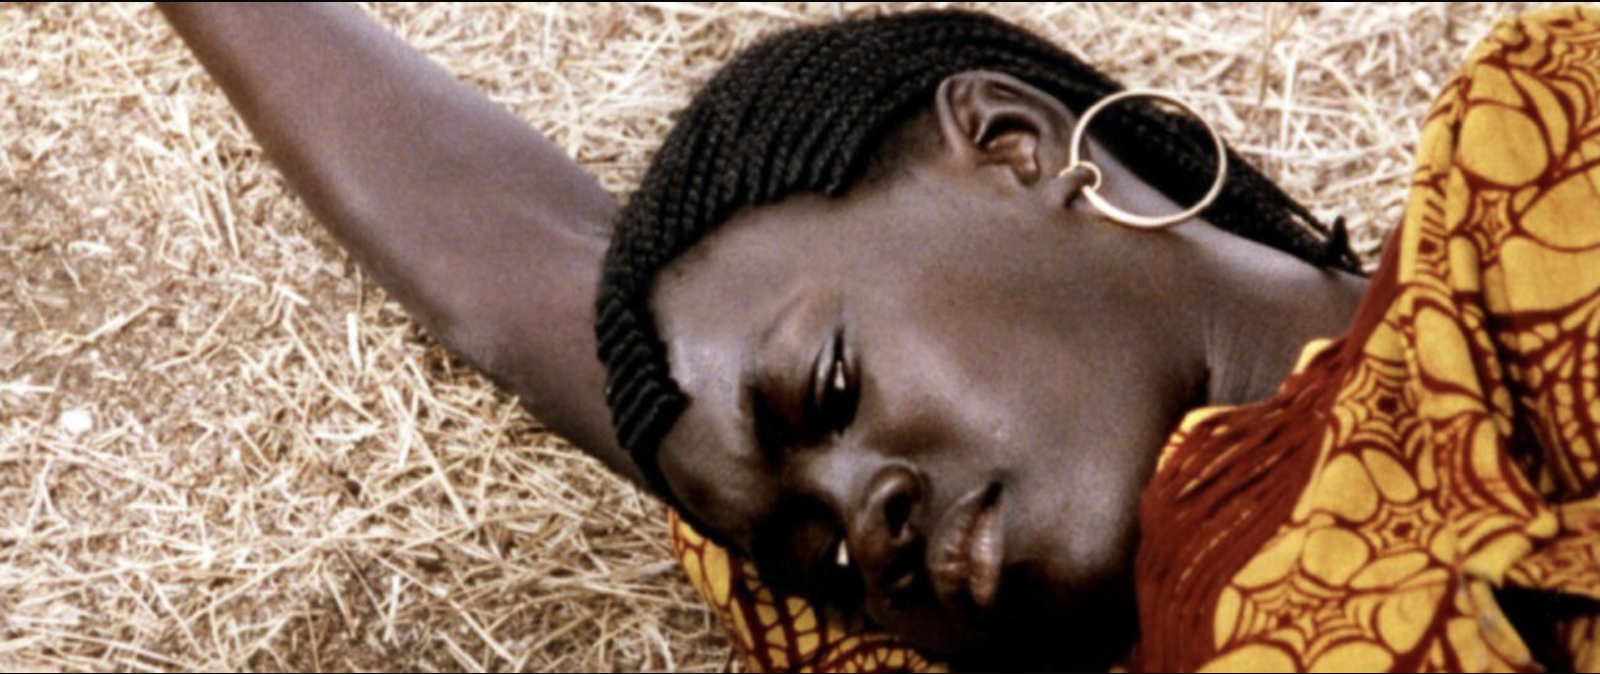 Magou Seck as Mossane in Sefi Faye's eponymous epic (1996).